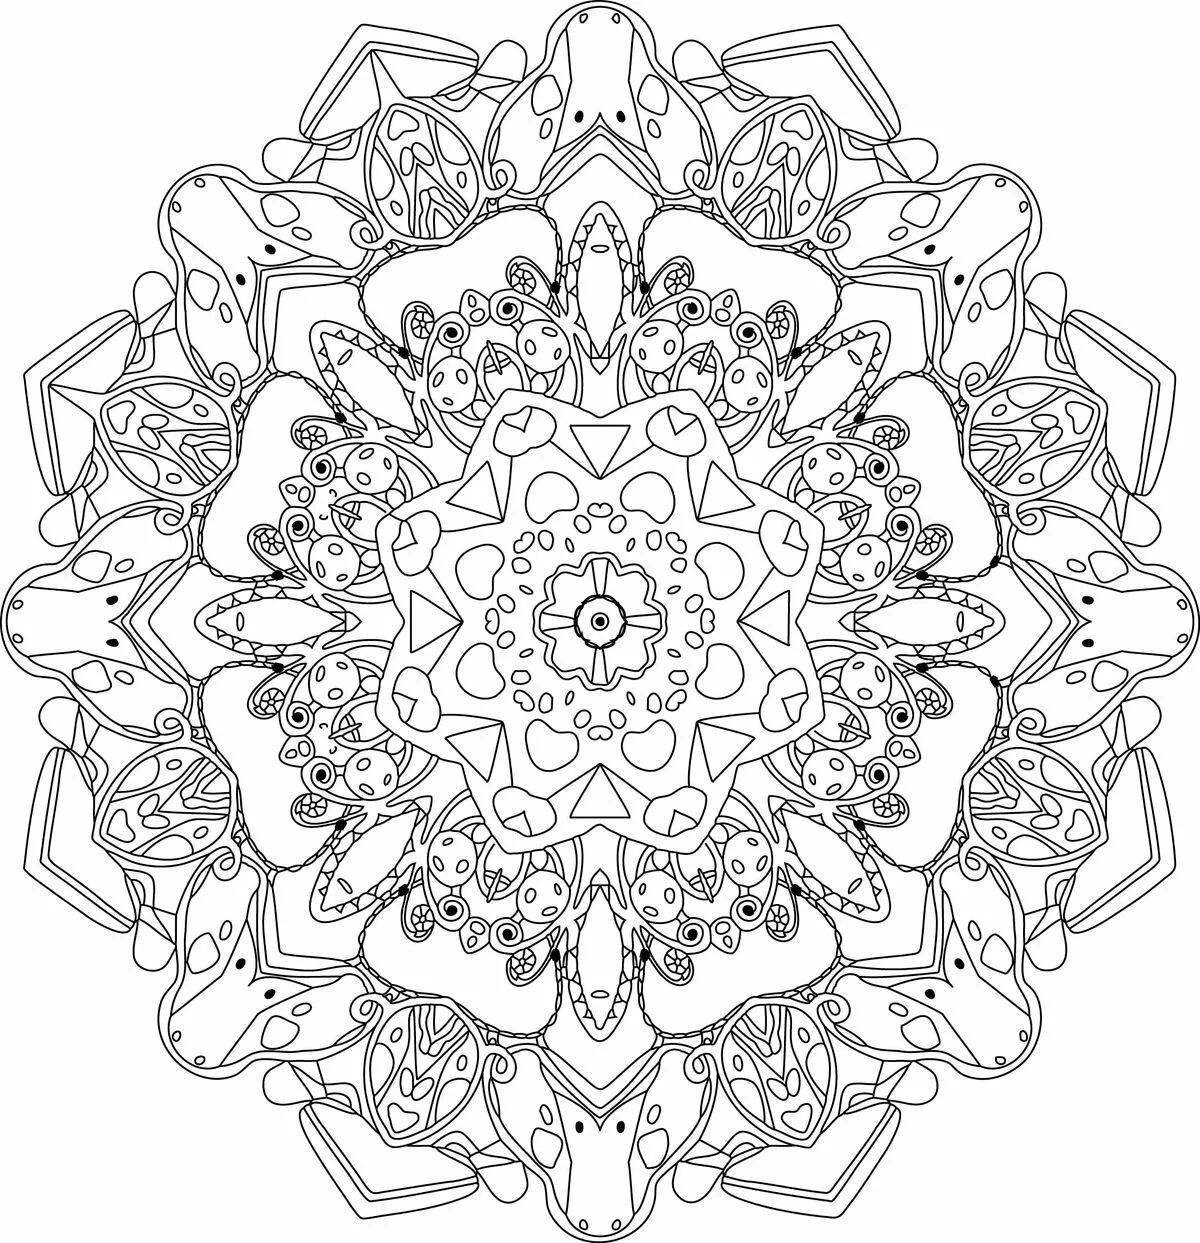 A fascinating psychological anti-stress coloring book